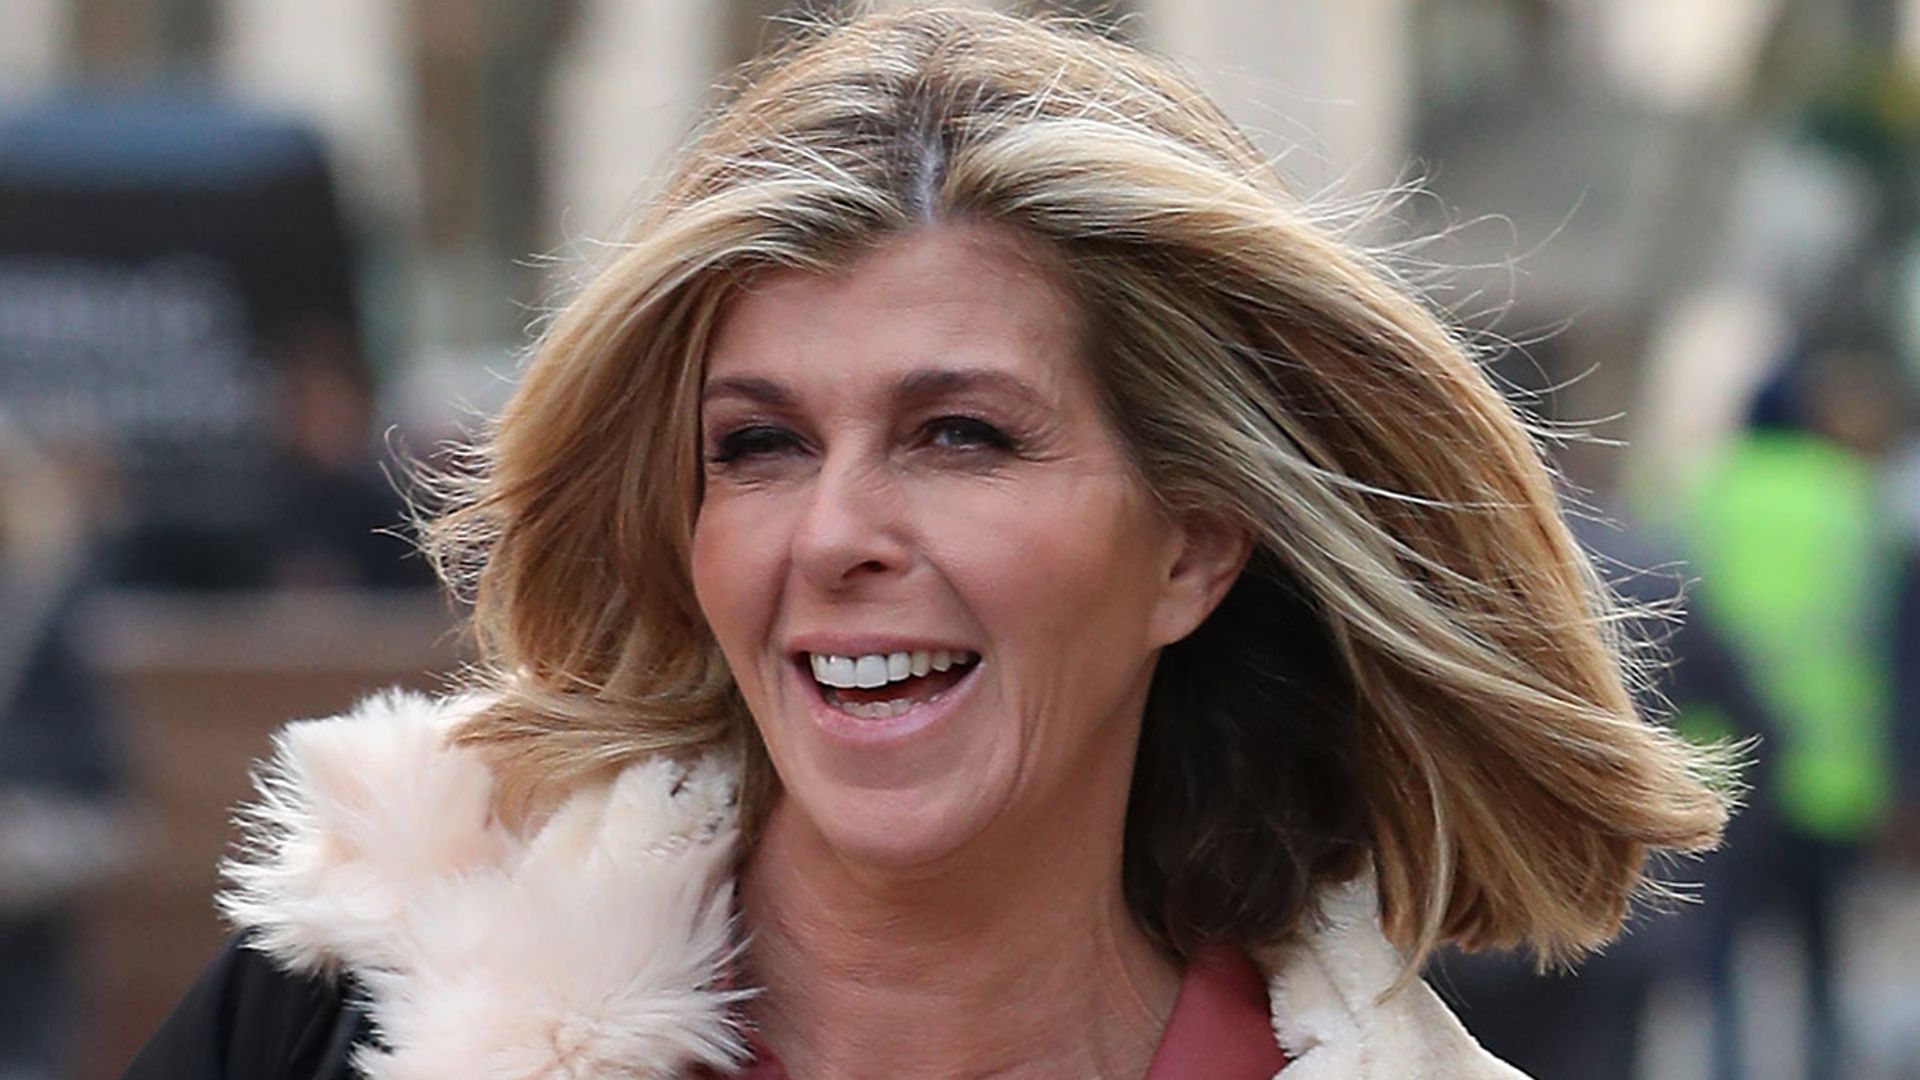 Good Morning Britain's Kate Garraway is a cosy snow queen in her Very loungewear